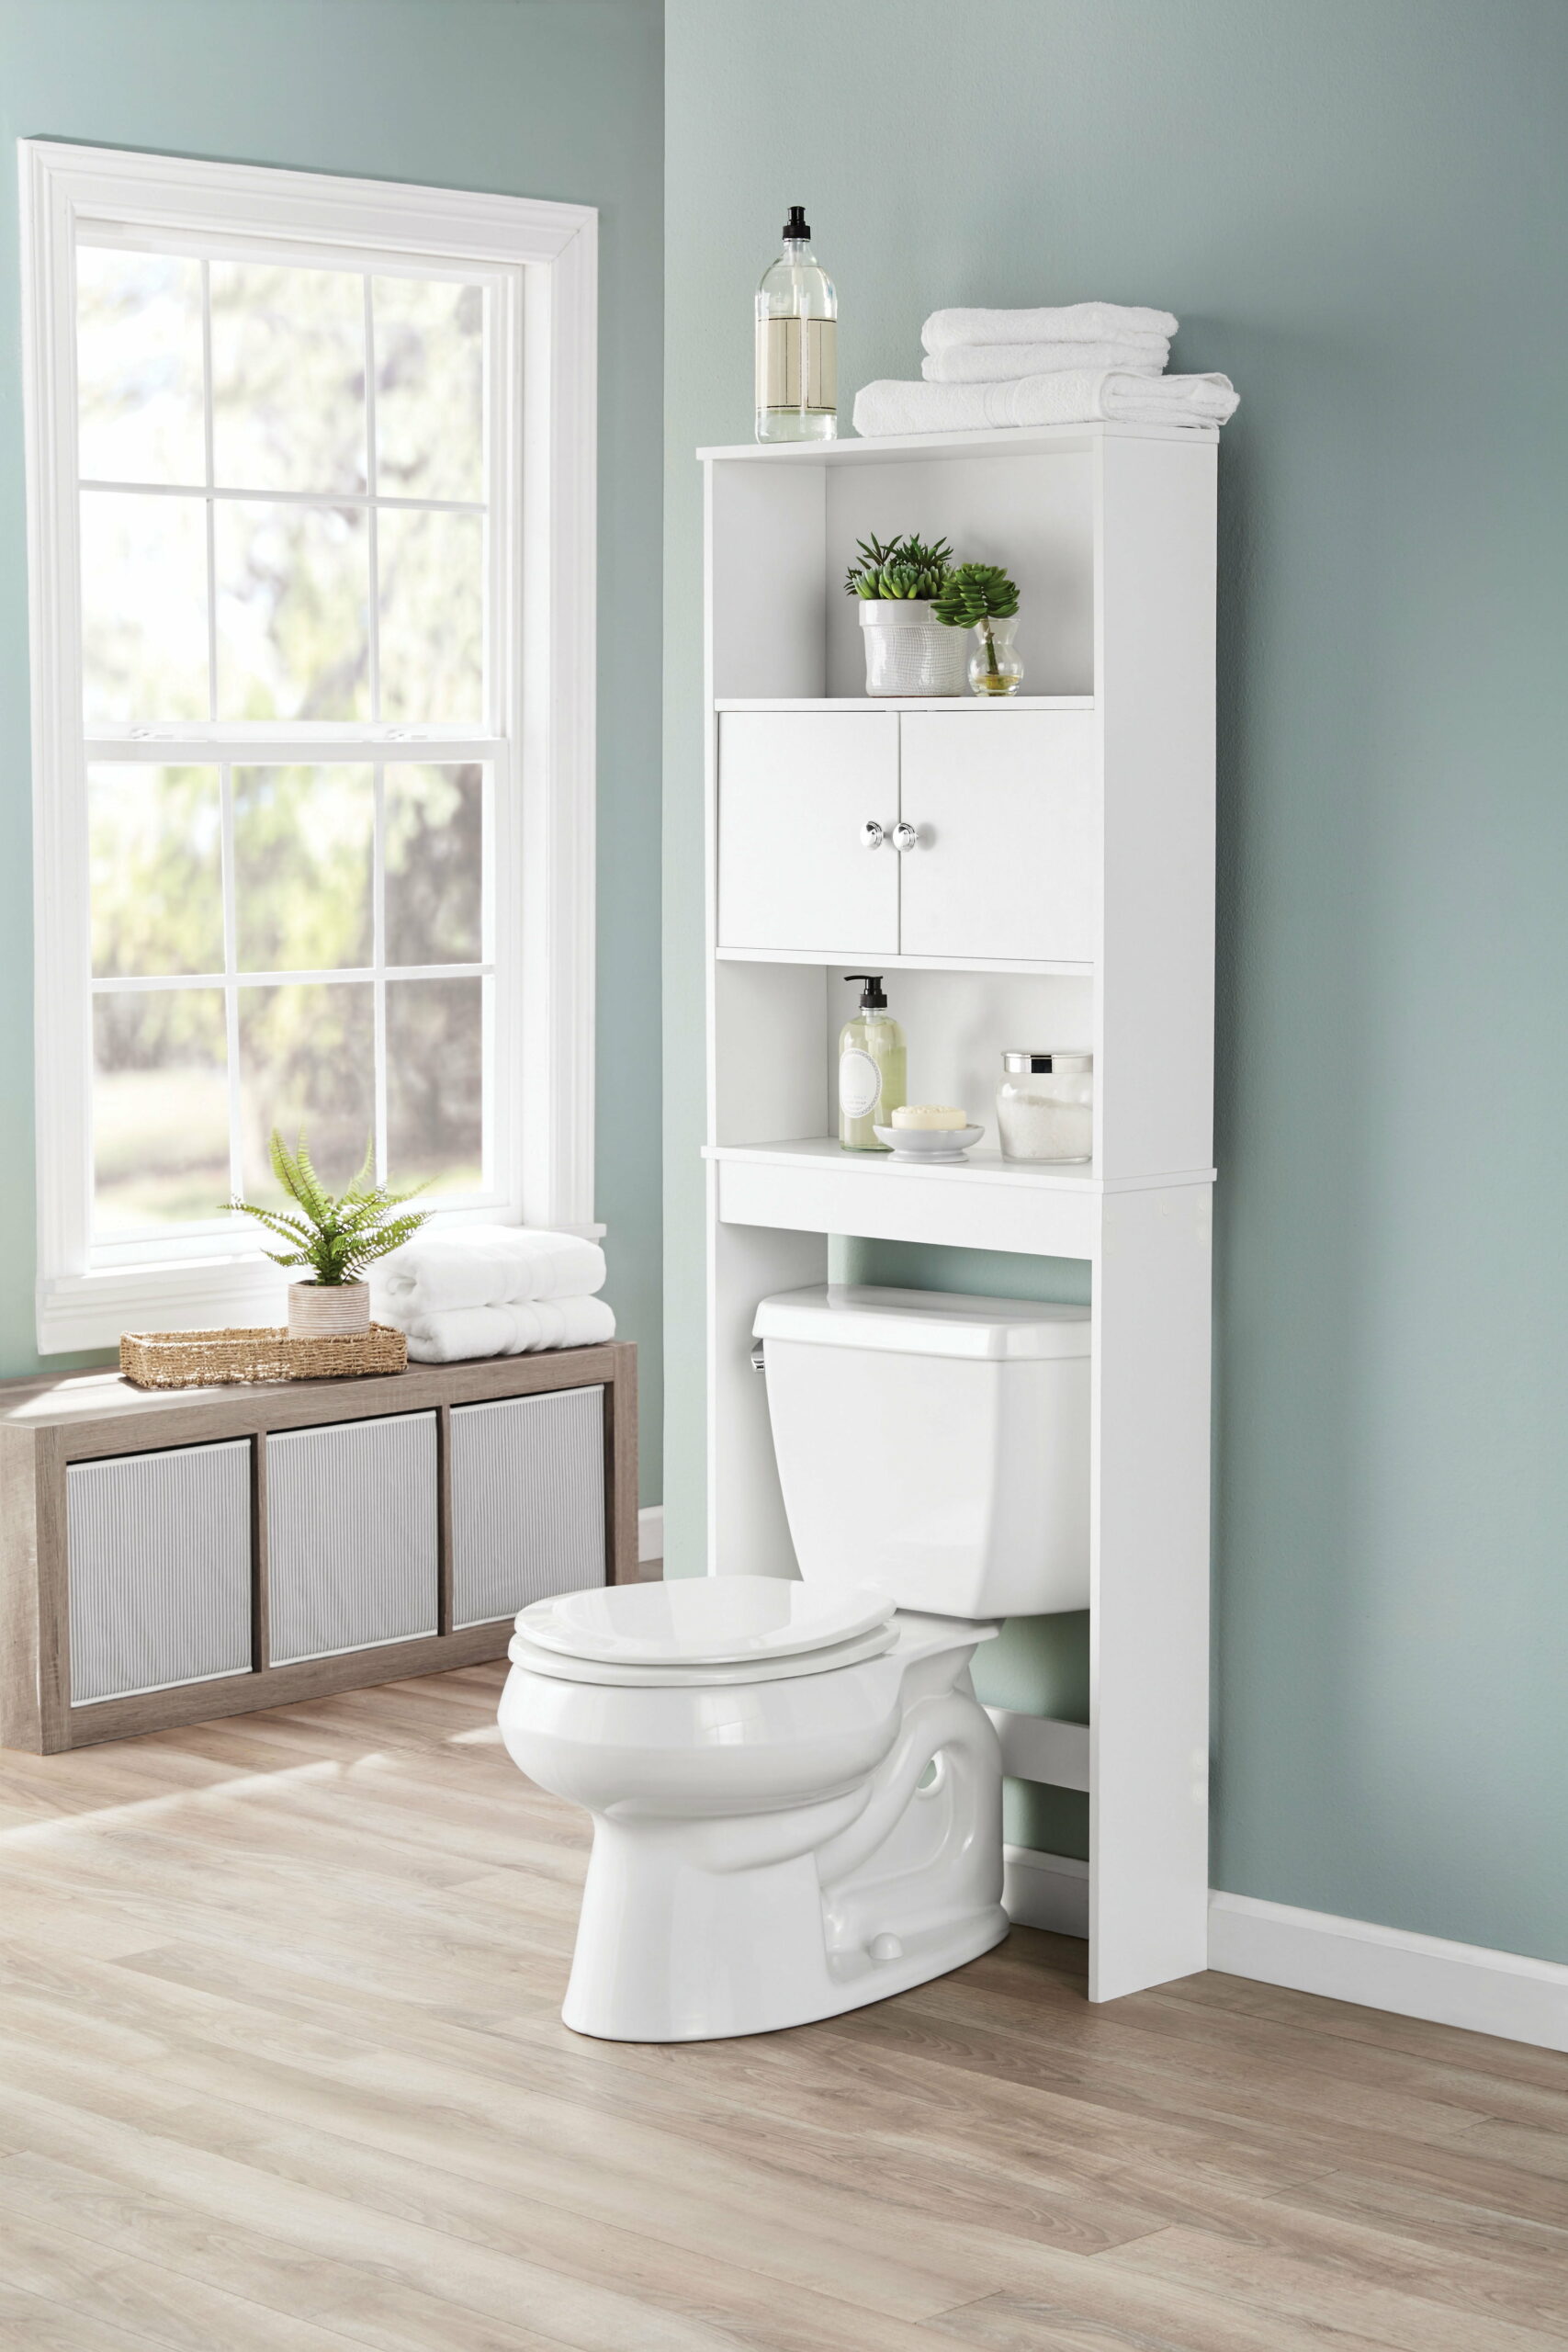 over the toilet storage with cabinets Toilet bathroom over cabinet storage rack walmart set wood tower